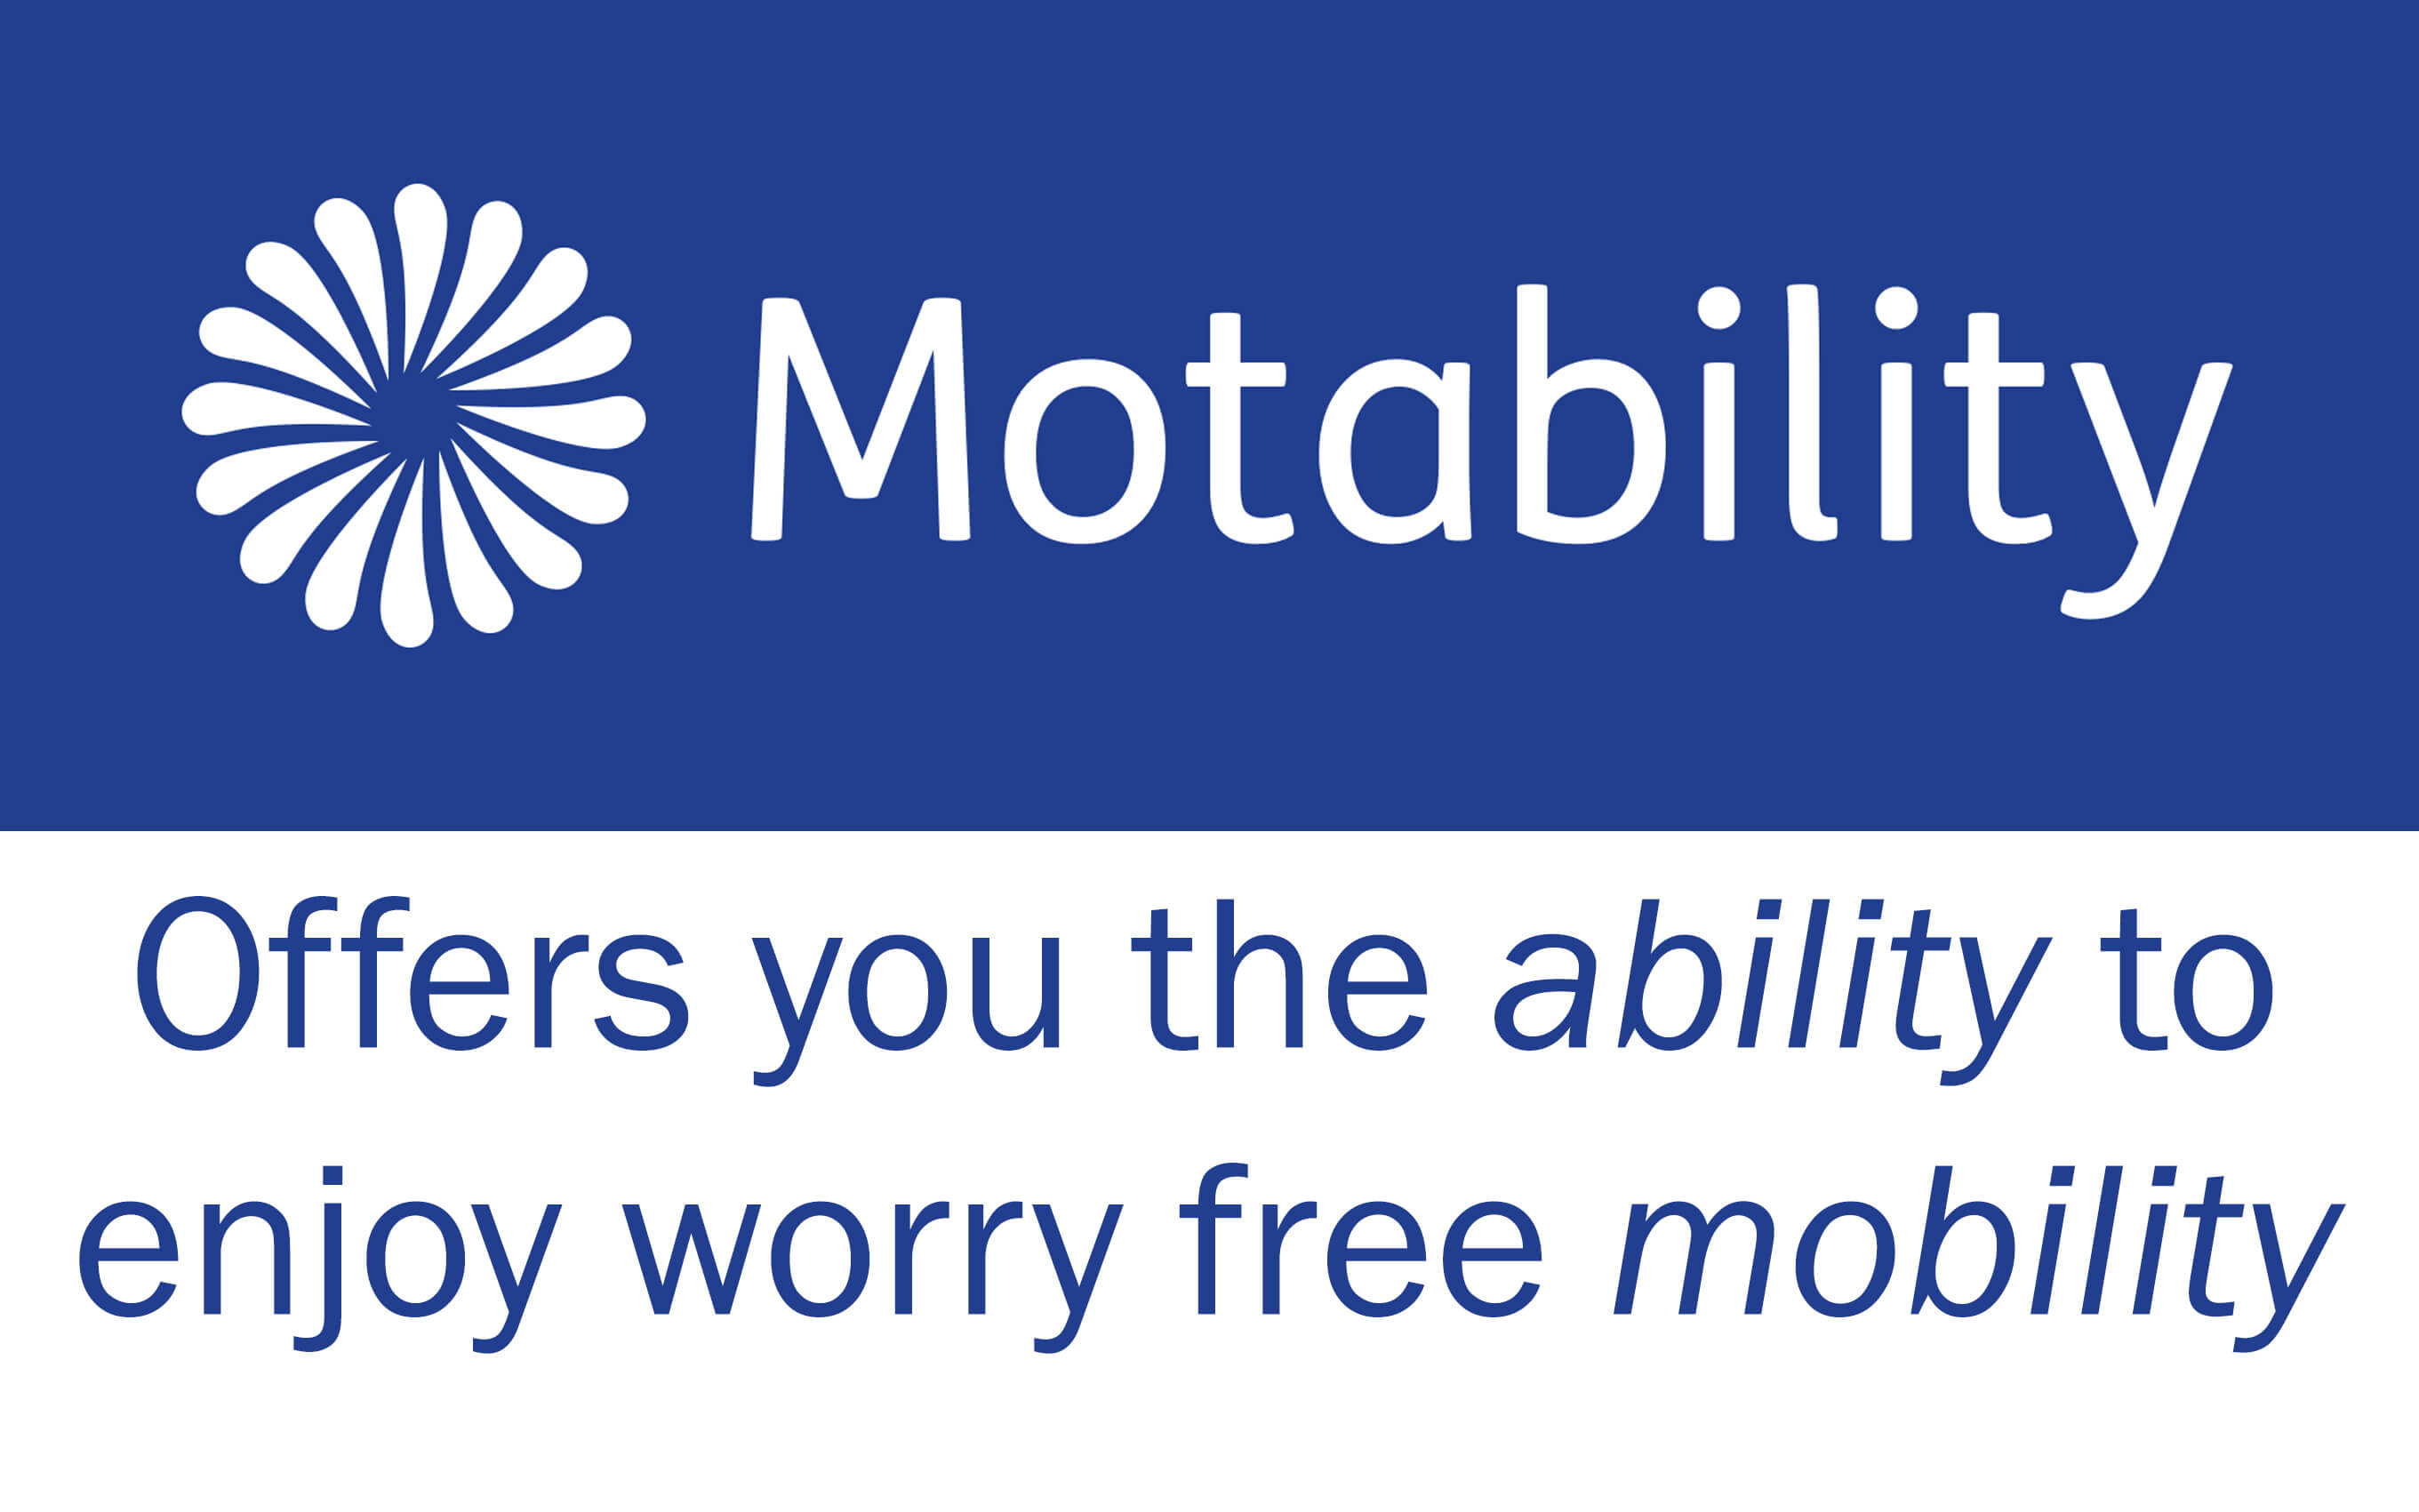 Sapphire2 is now a Motability Scooter!